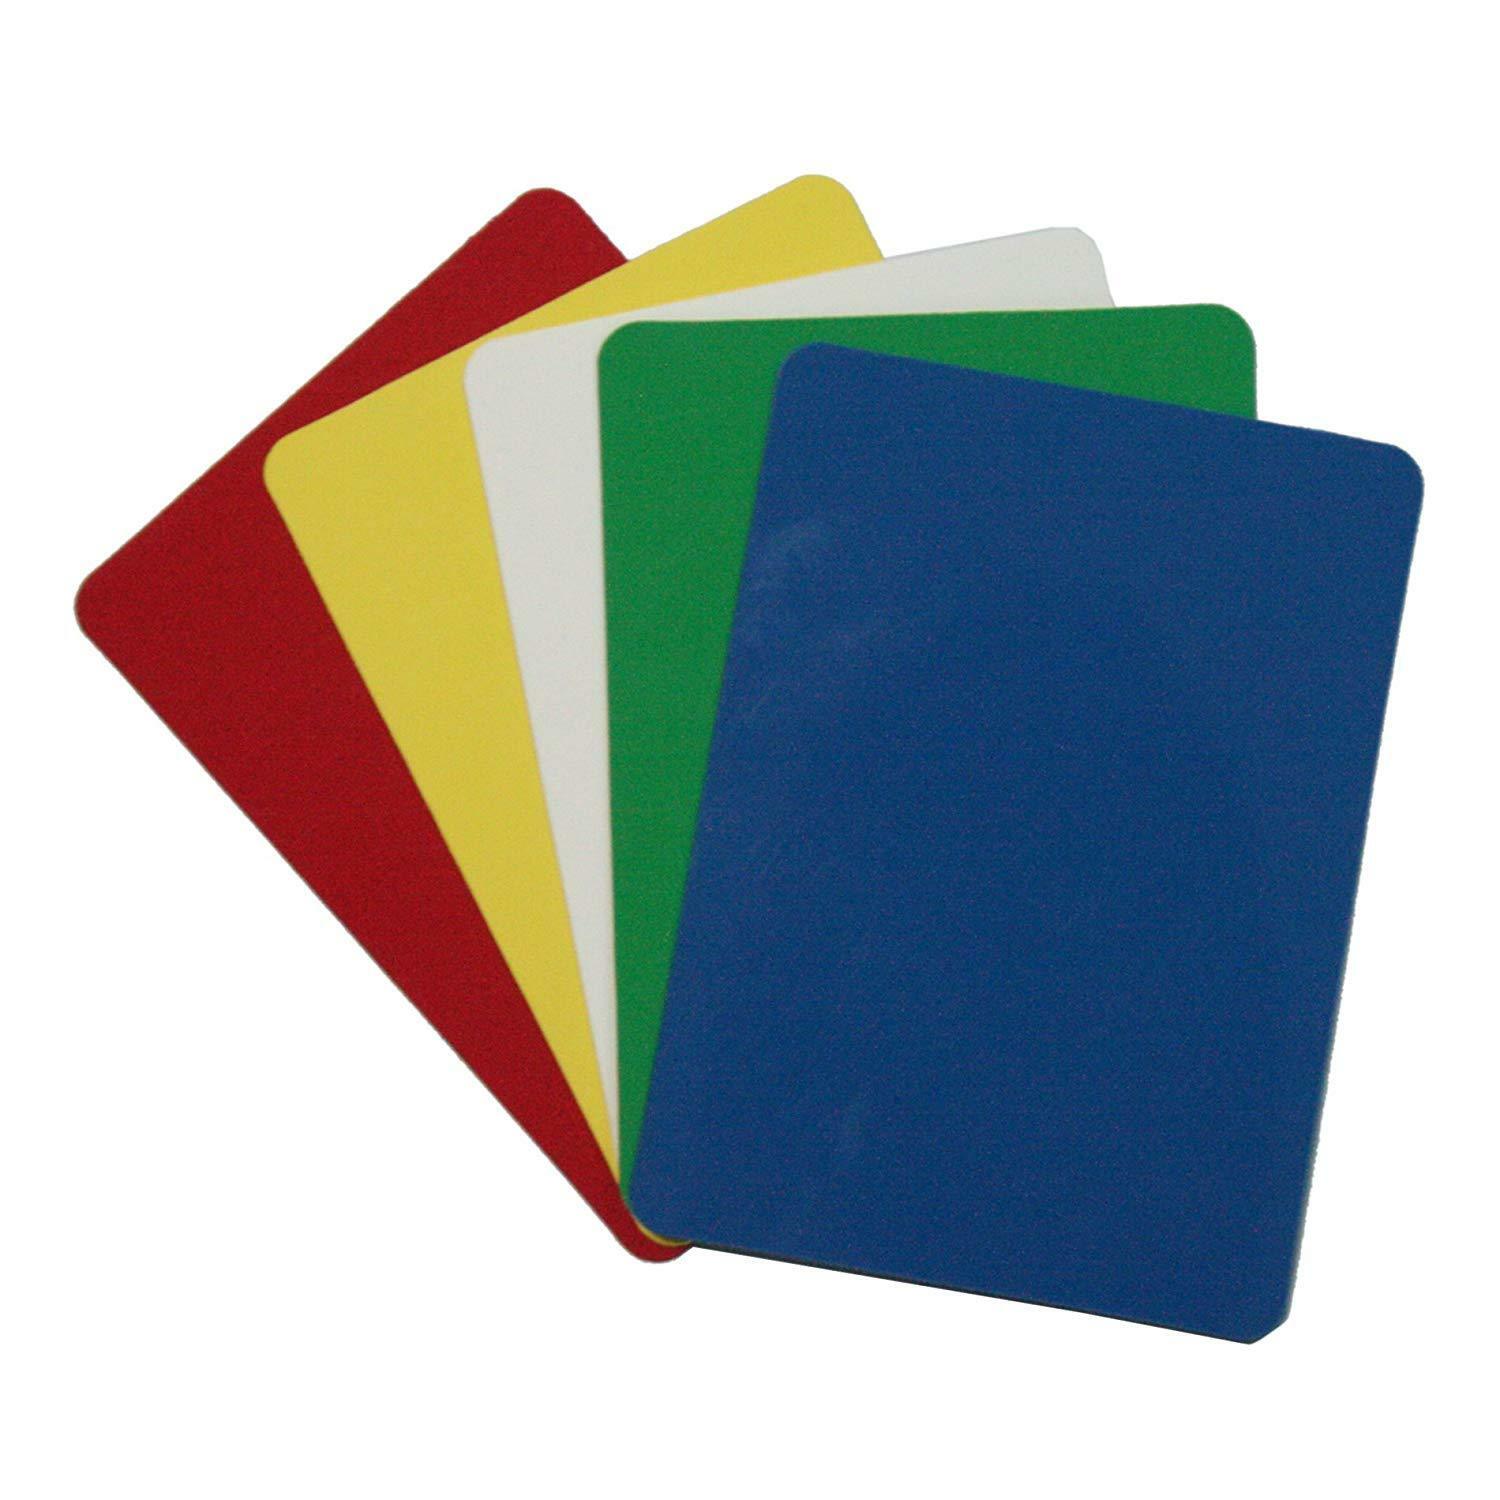 Set Of 10 Plastic Poker Size Cut Cards Fits Copag Kem Bicycle Playing Cards